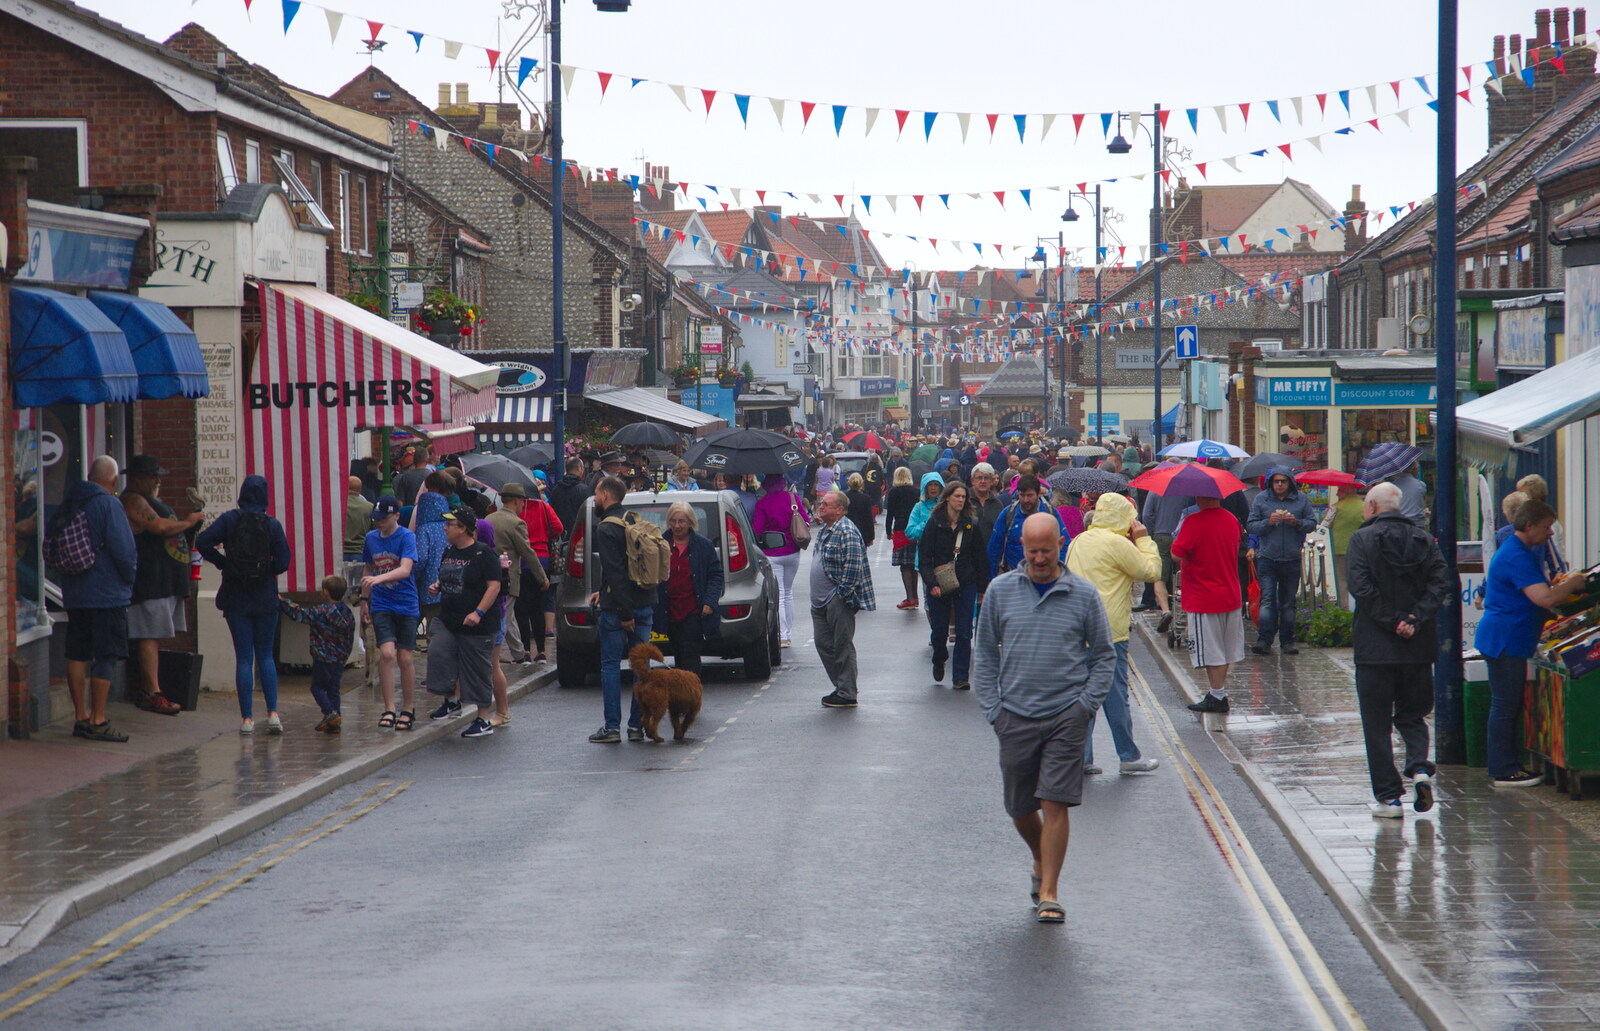 A packed Fore Street in Sheringham from Kelling Camping and the Potty Morris Festival, Sheringham, North Norfolk - 6th July 2019